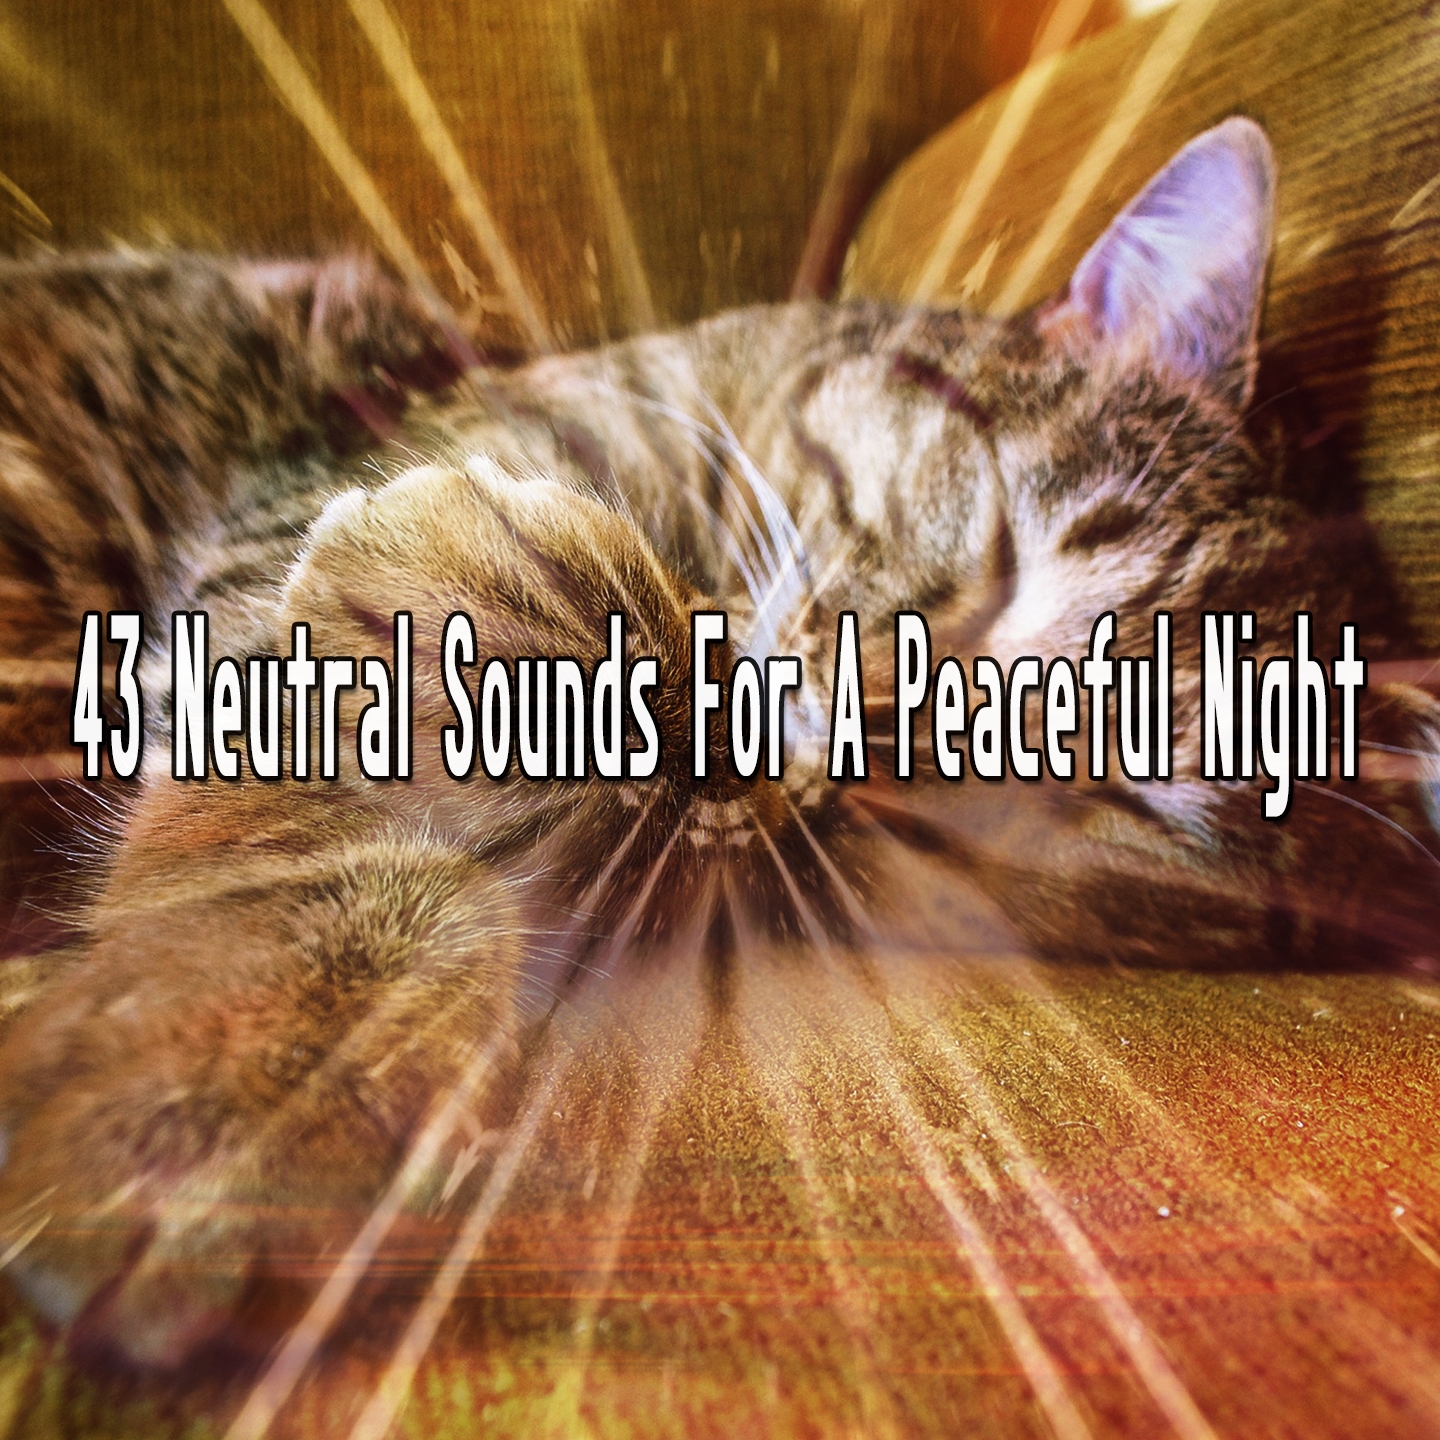 43 Neutral Sounds For A Peaceful Night